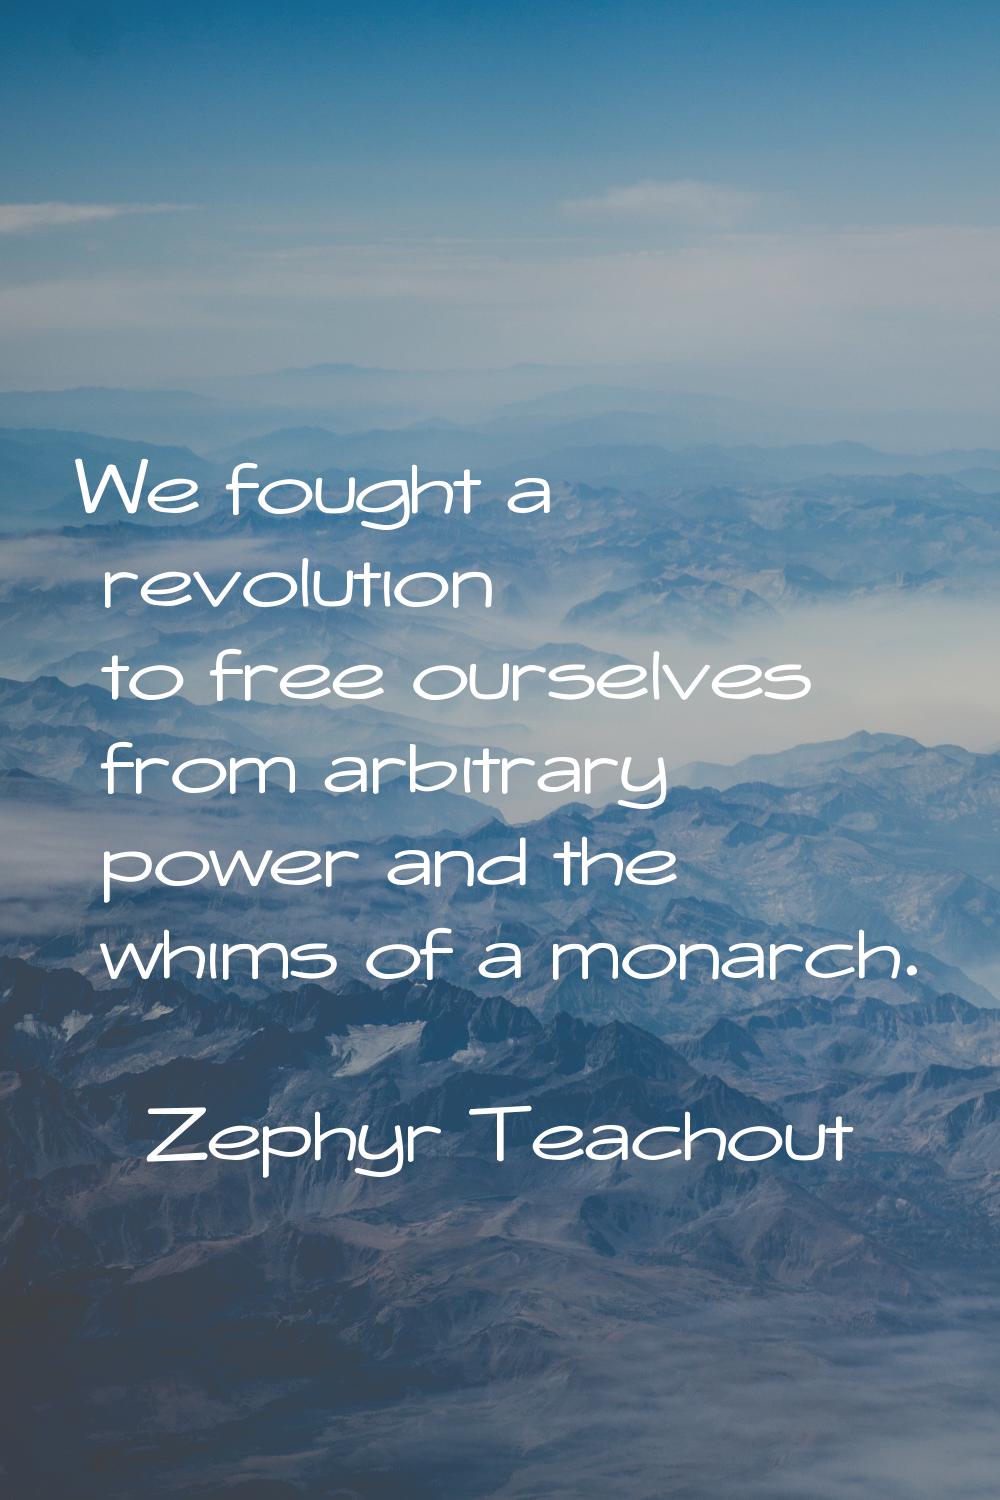 We fought a revolution to free ourselves from arbitrary power and the whims of a monarch.